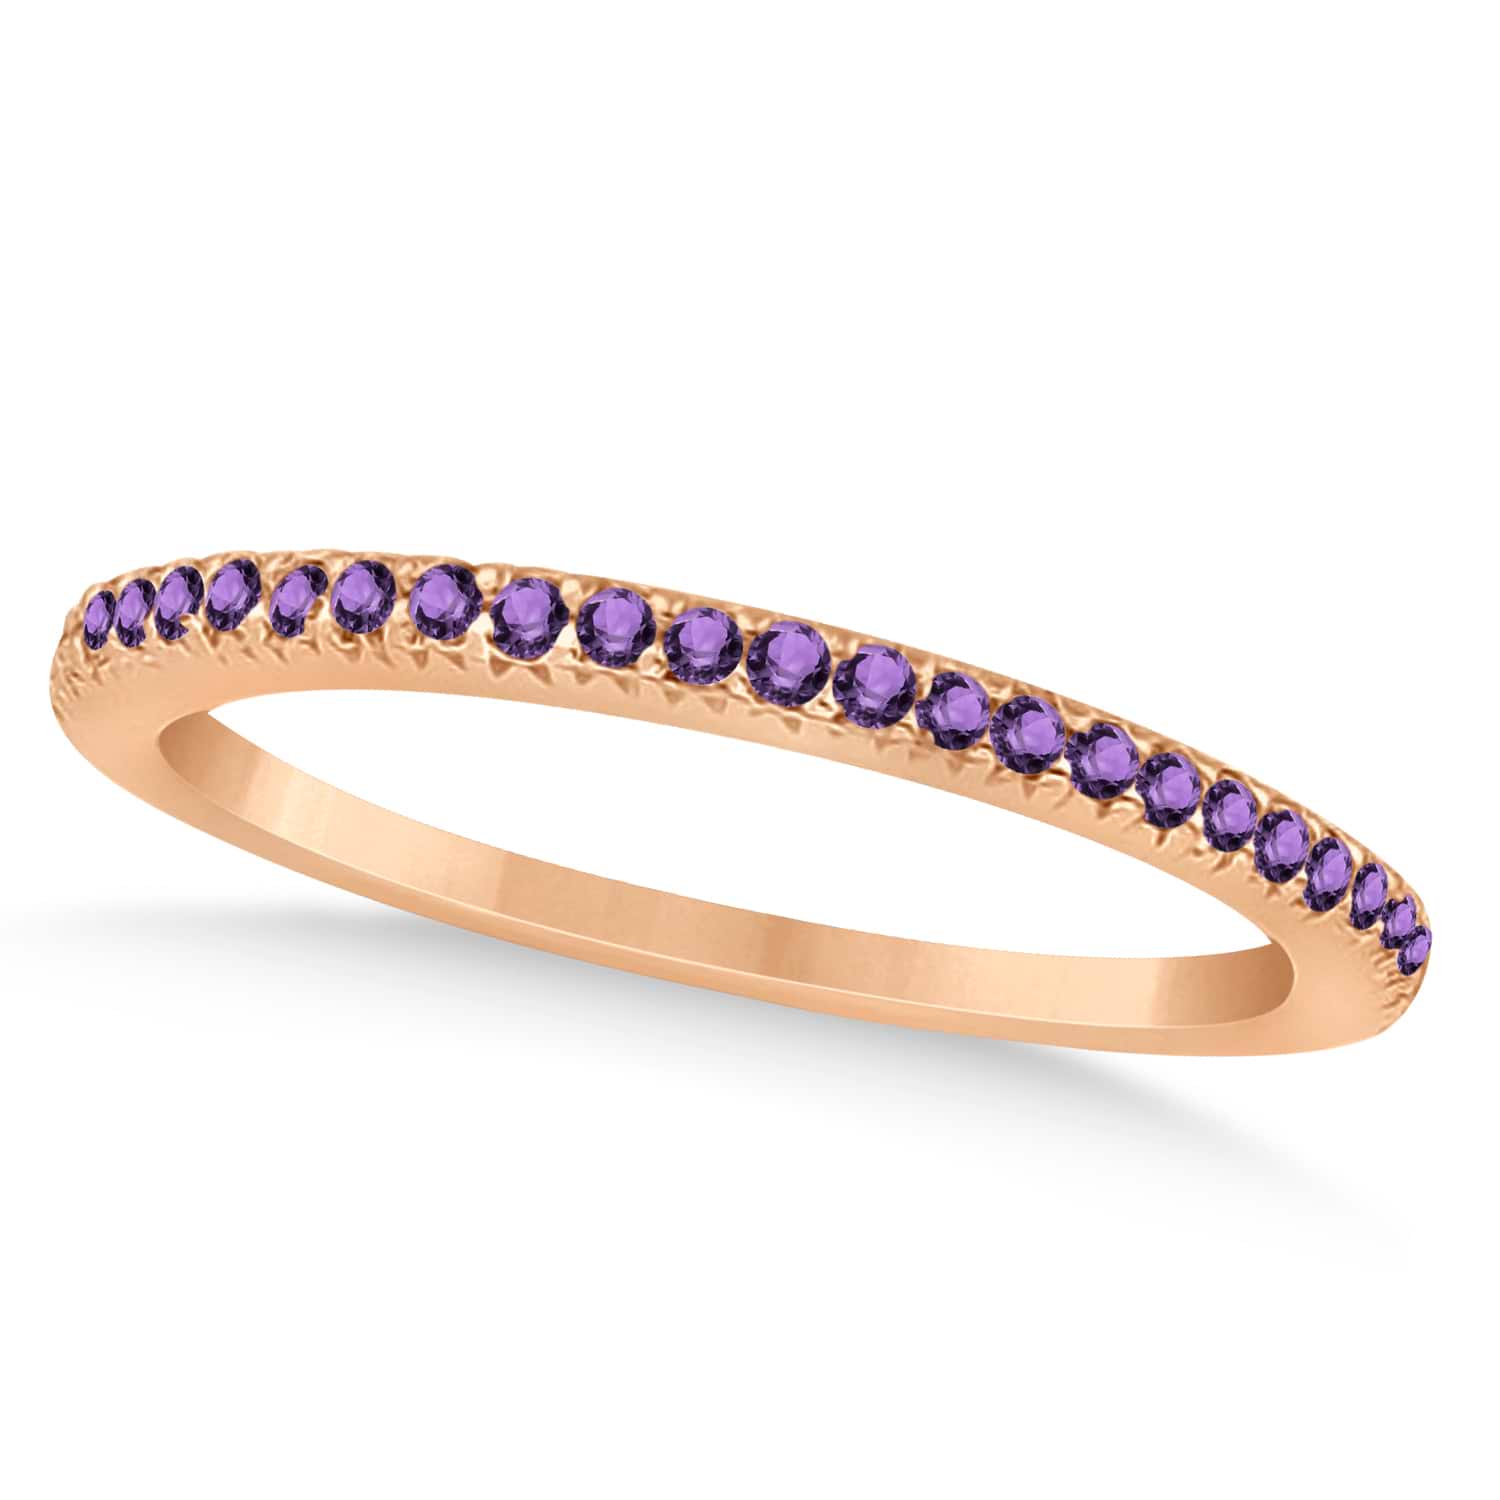 Amethyst Accented Wedding Band 14k Rose Gold 0.21ct